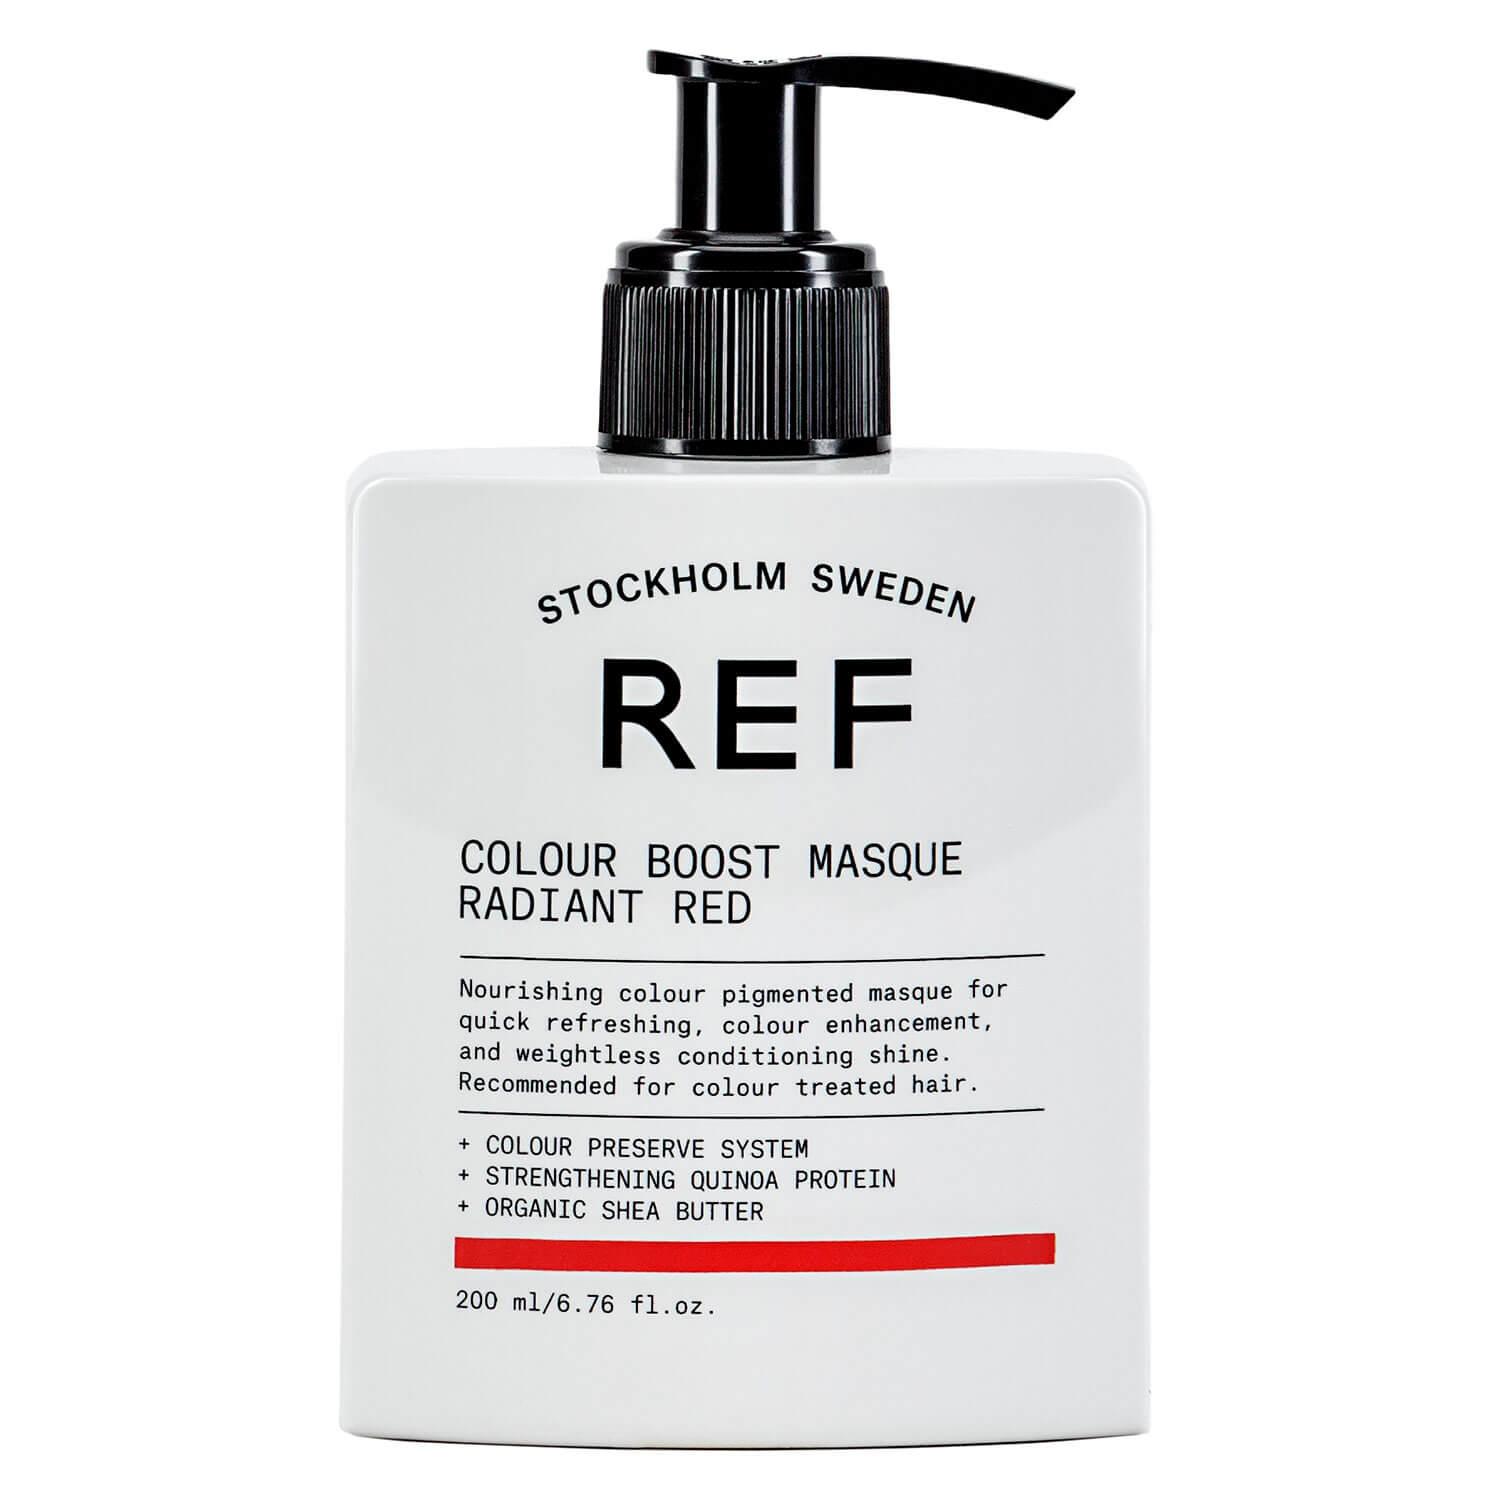 REF Treatment - Colour Boost Masque Radiant Red